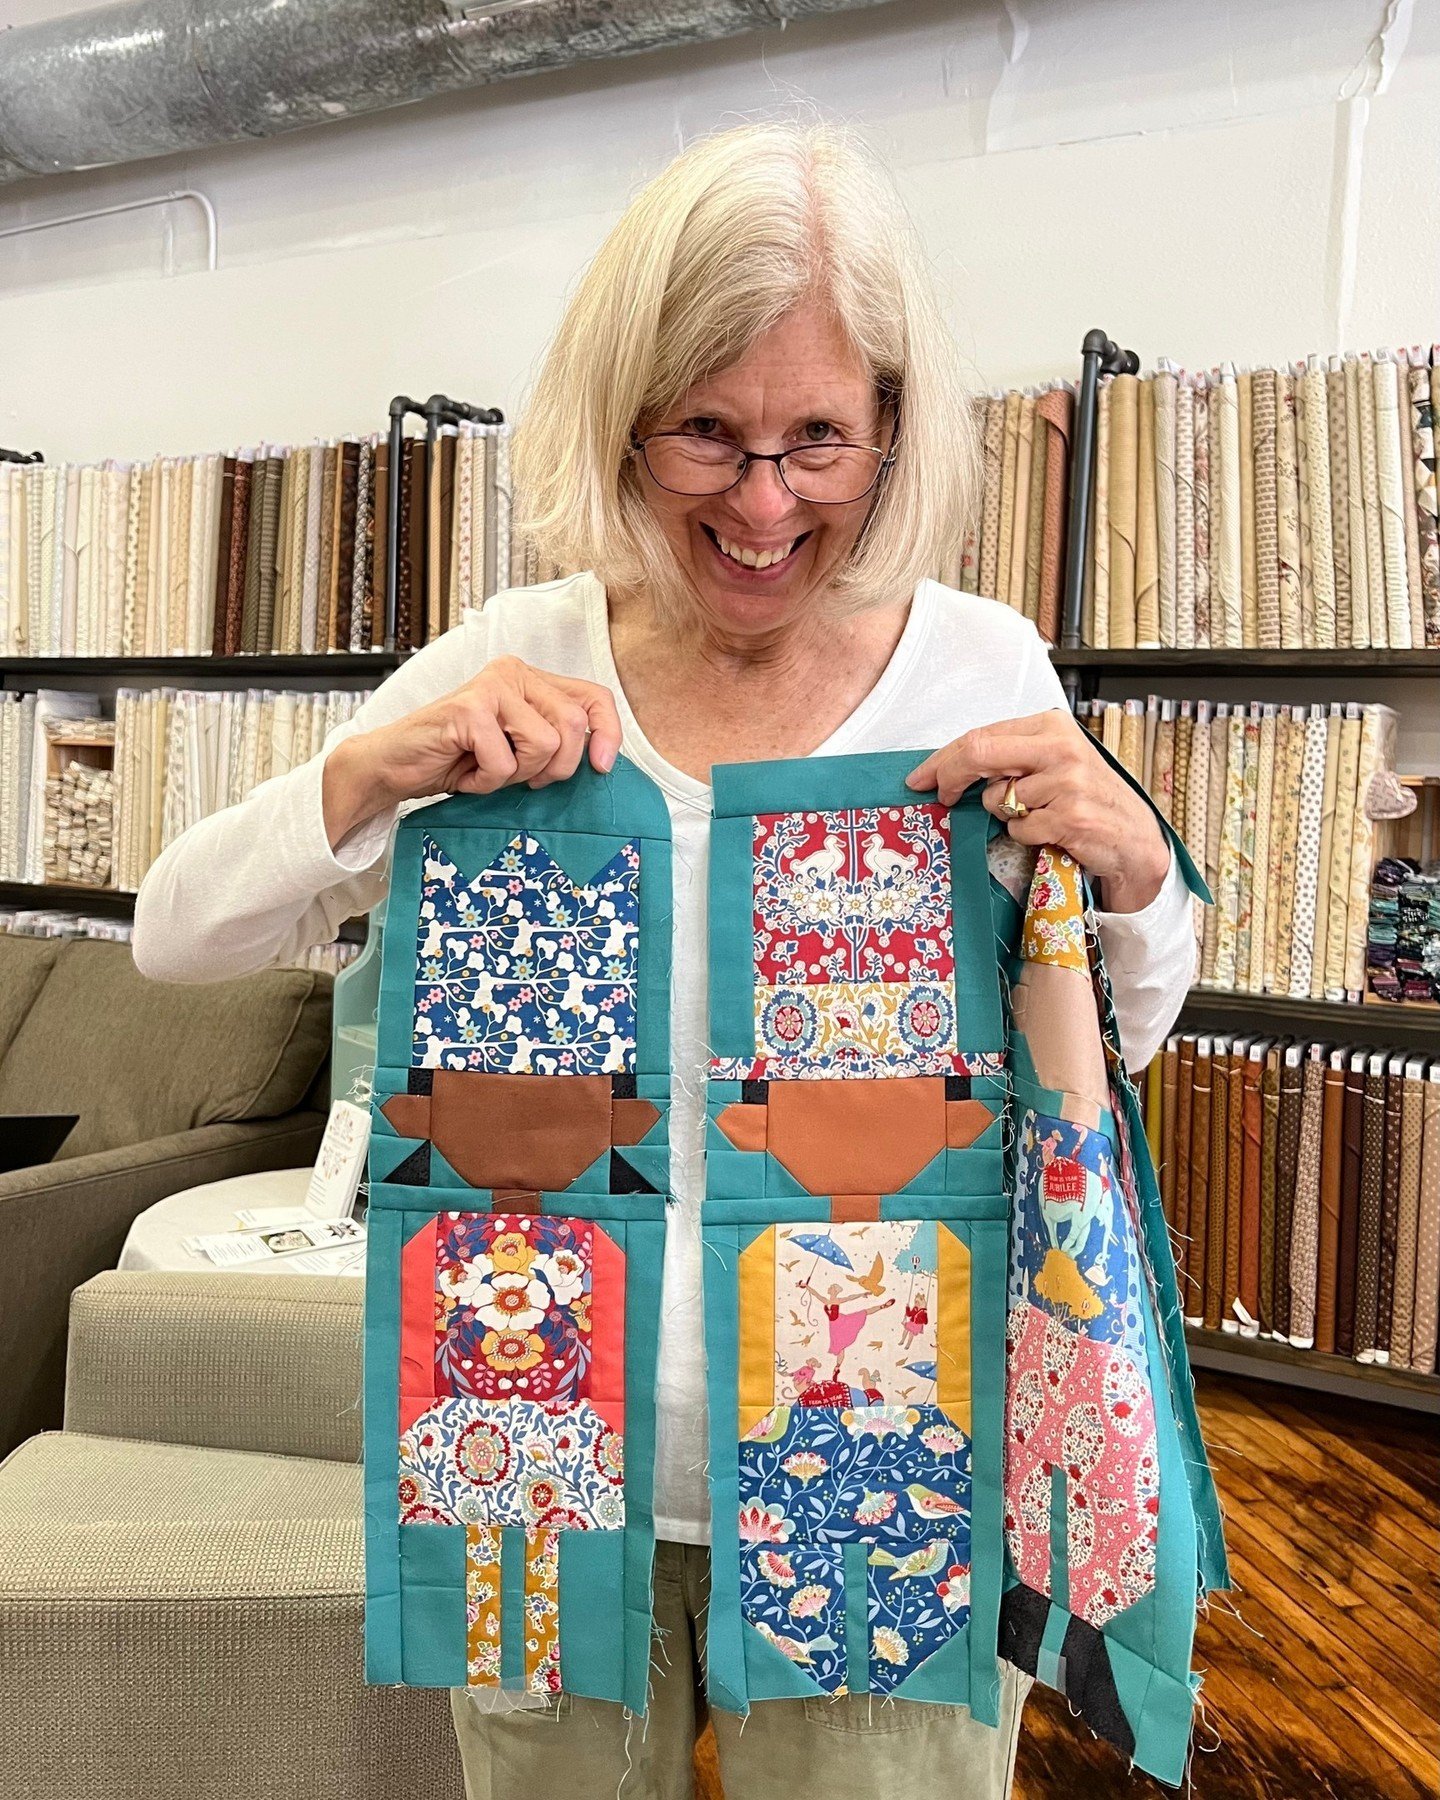 A talented customer came in with these amazing blocks, and we had to share with you! These are from the free Tilda&rsquo;s World pattern called My Birthday Party Quilt! To see the pattern tap the link in our profile.

#mybirthdaypartyquilt #tildaswor